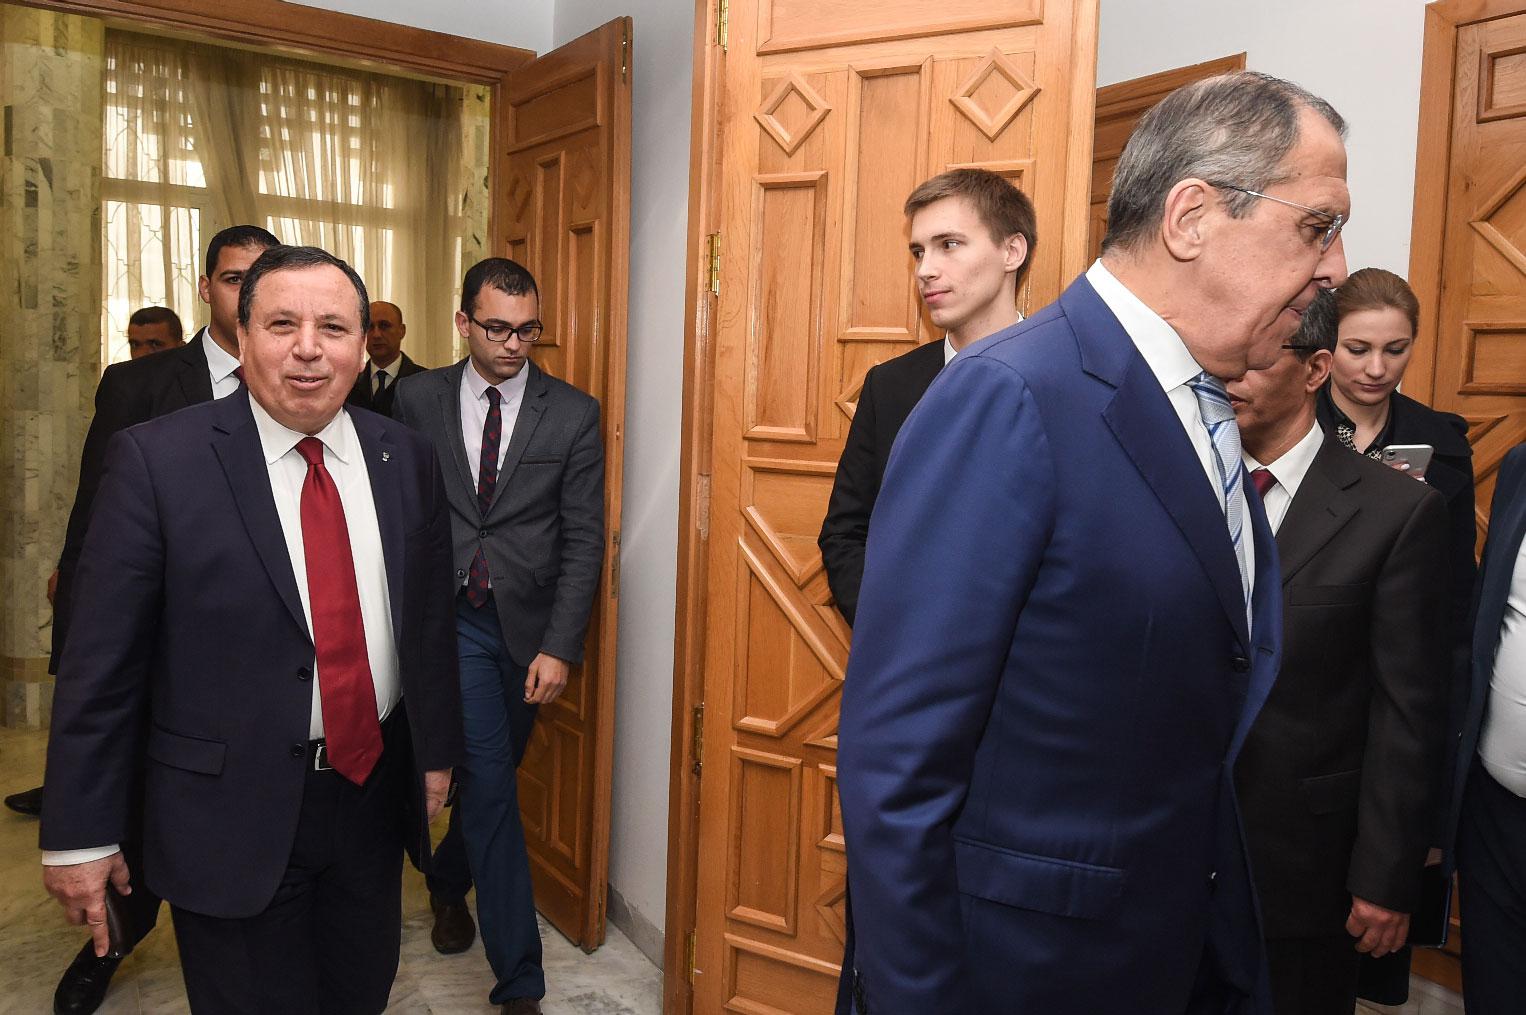 Tunisian Foreign Minister Khemaies Jhinaoui (L) arrives for a meeting with visiting Russian Foreign Minister Sergei Lavrov (R) in the capital Tunis on January 26, 2019.